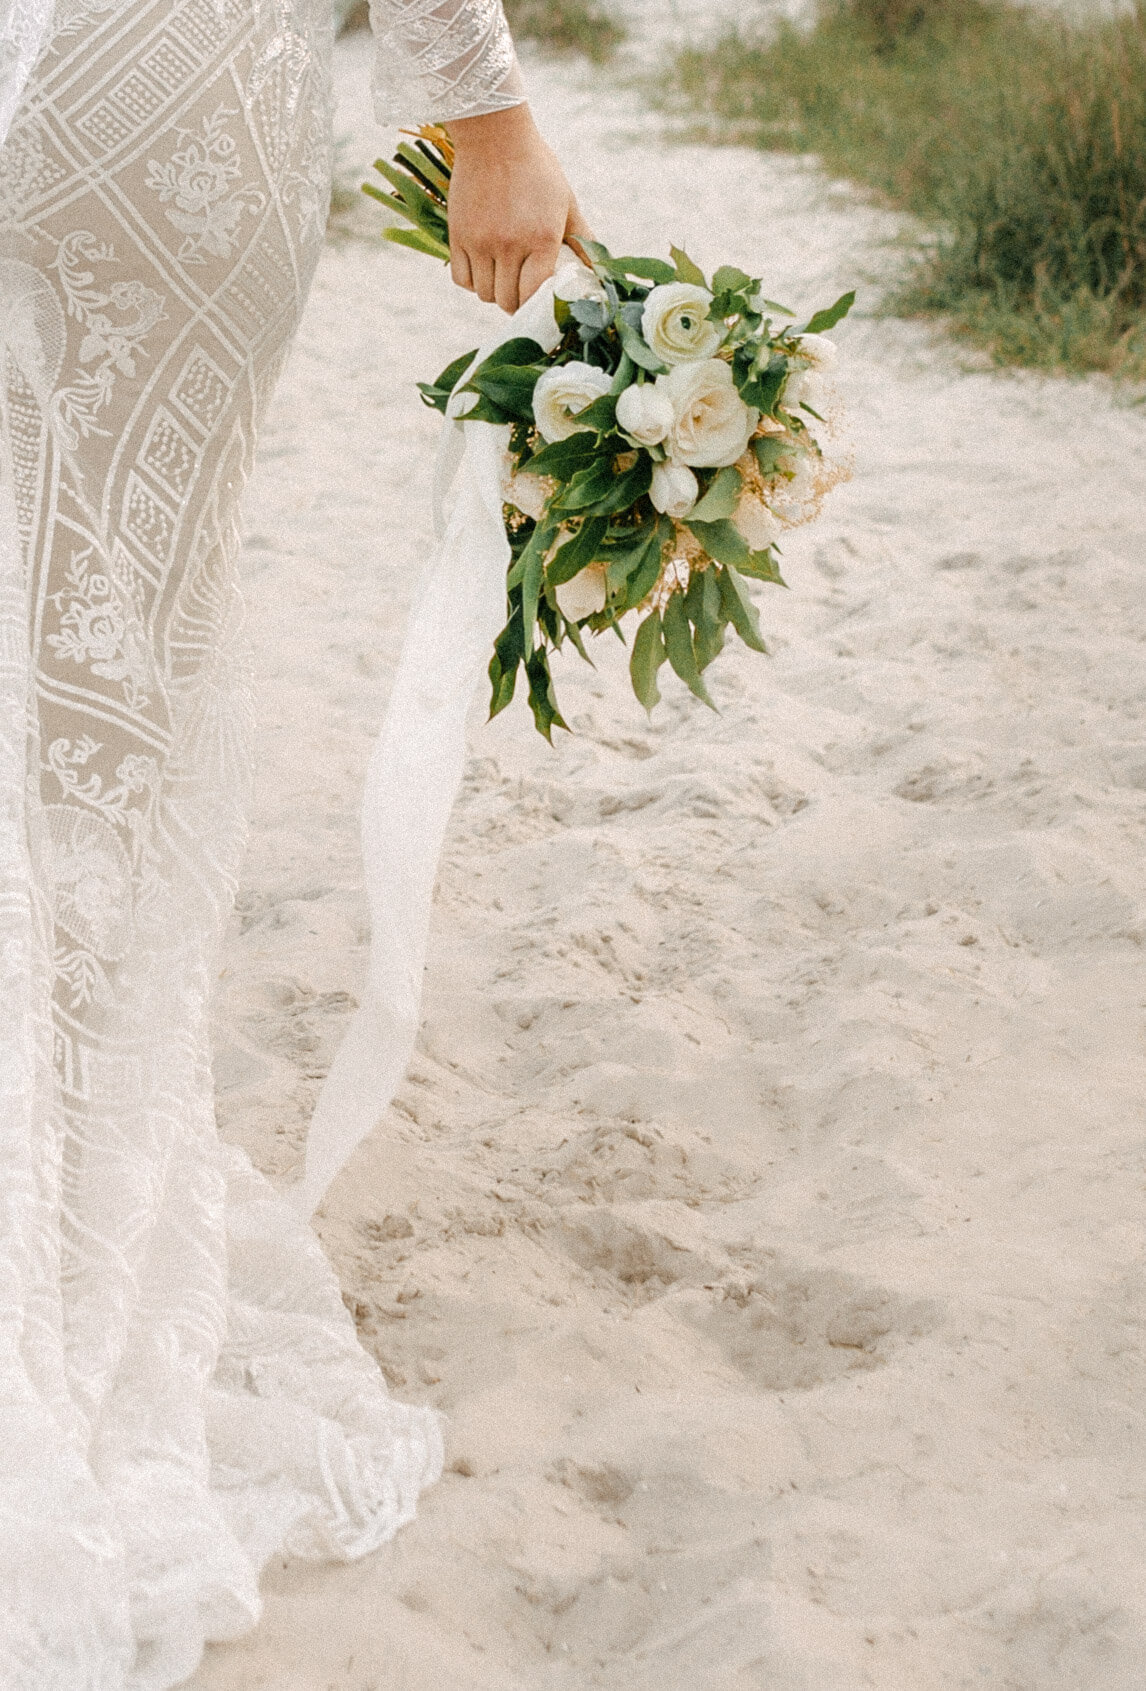 bouquet shot of asian bride in bridal dress and veil walks on beach path - taken by panama city fl photographer Brittney Stanley